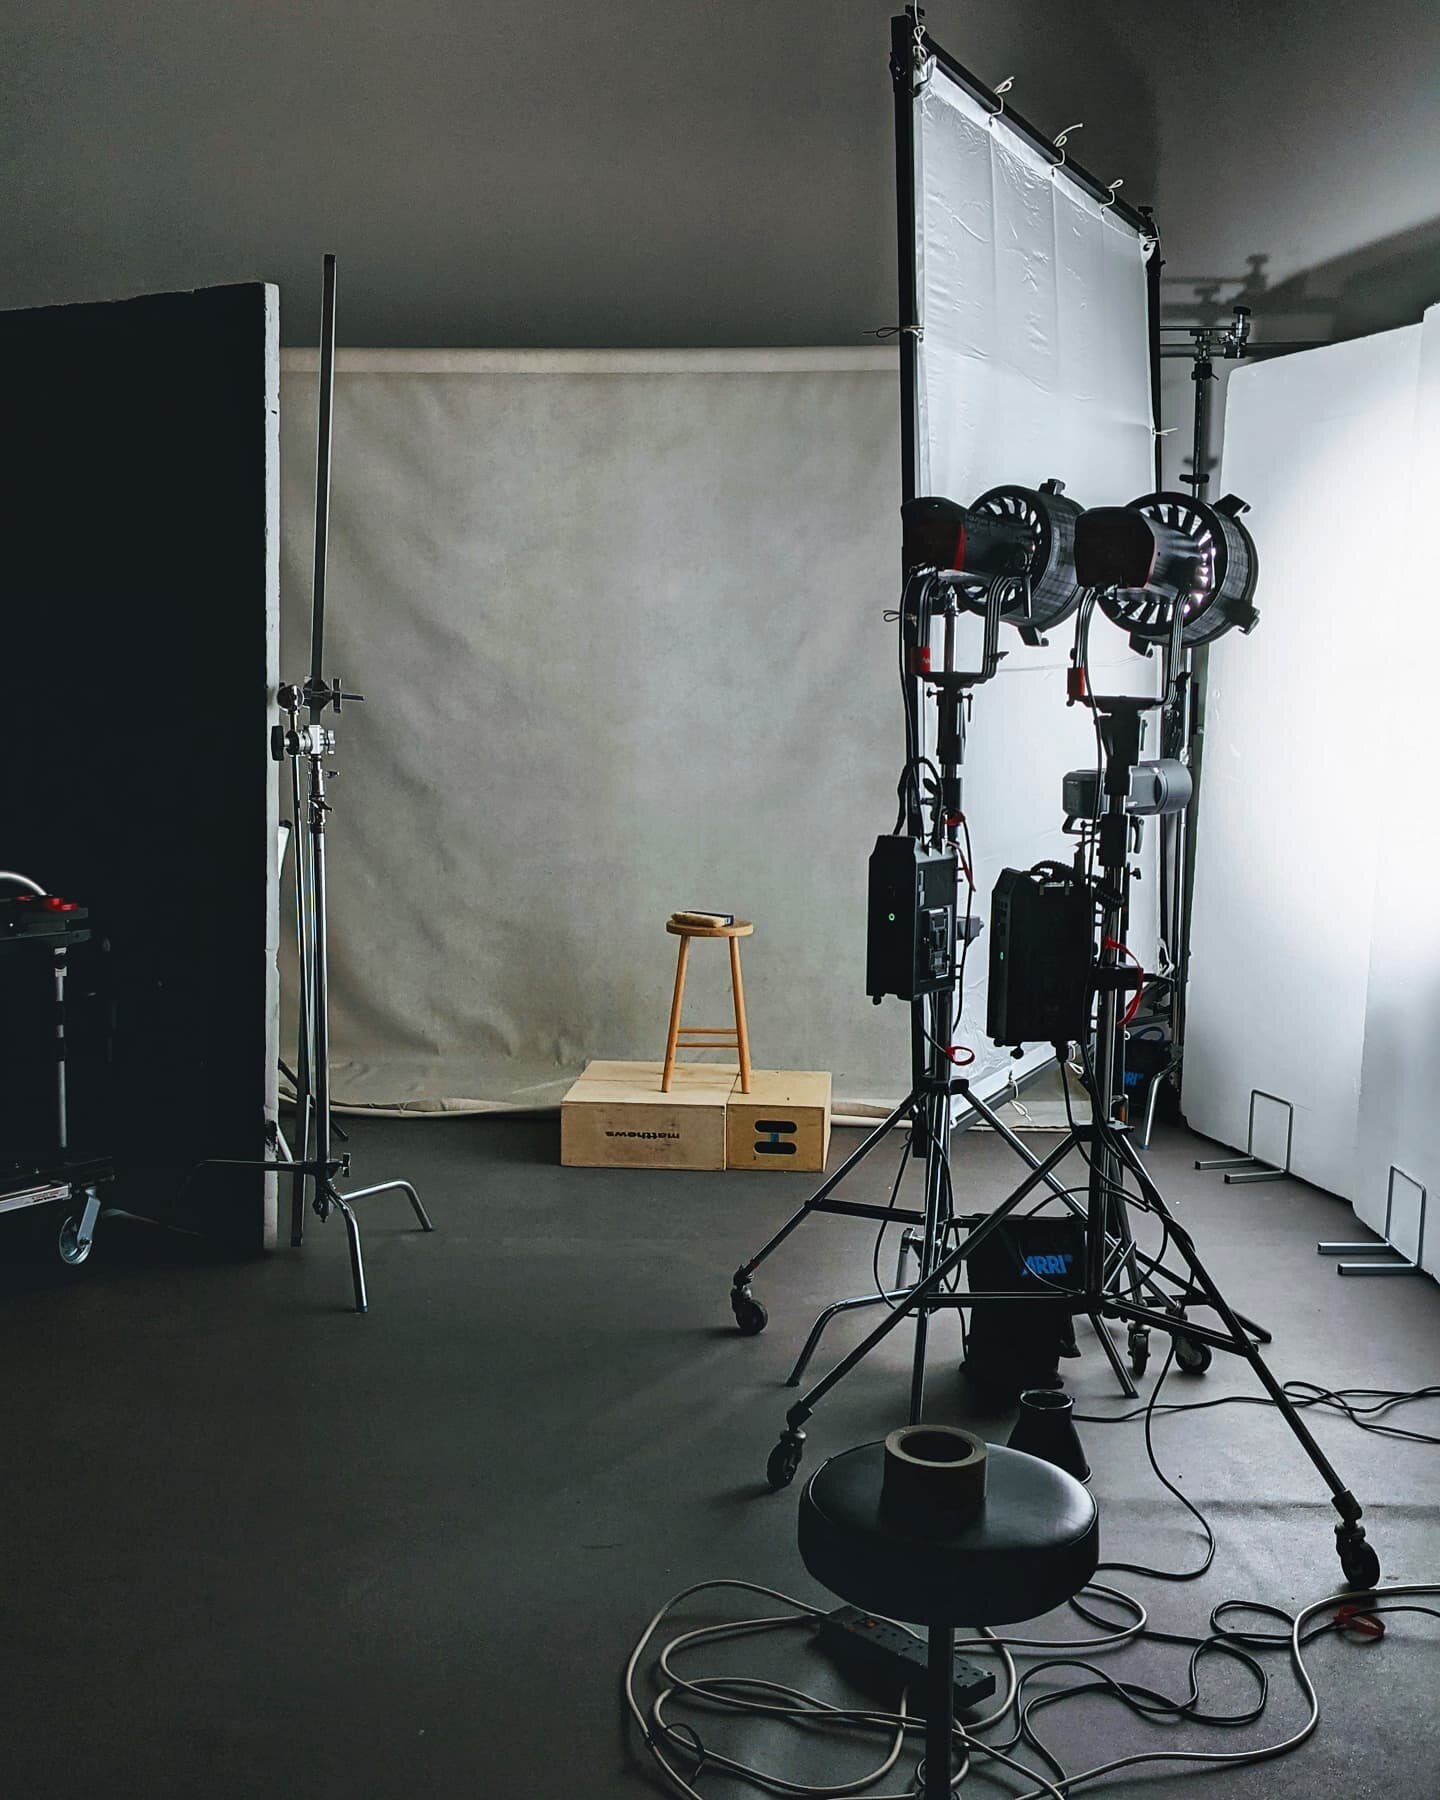 If you've got a lot to capture in a one day shoot, it's always worth speaking to us about our pre-light options. Saving a few hours set up time in the morning can make all the difference to the productivity of your shoot!
.
.
.
#filmmaker #filmproduc